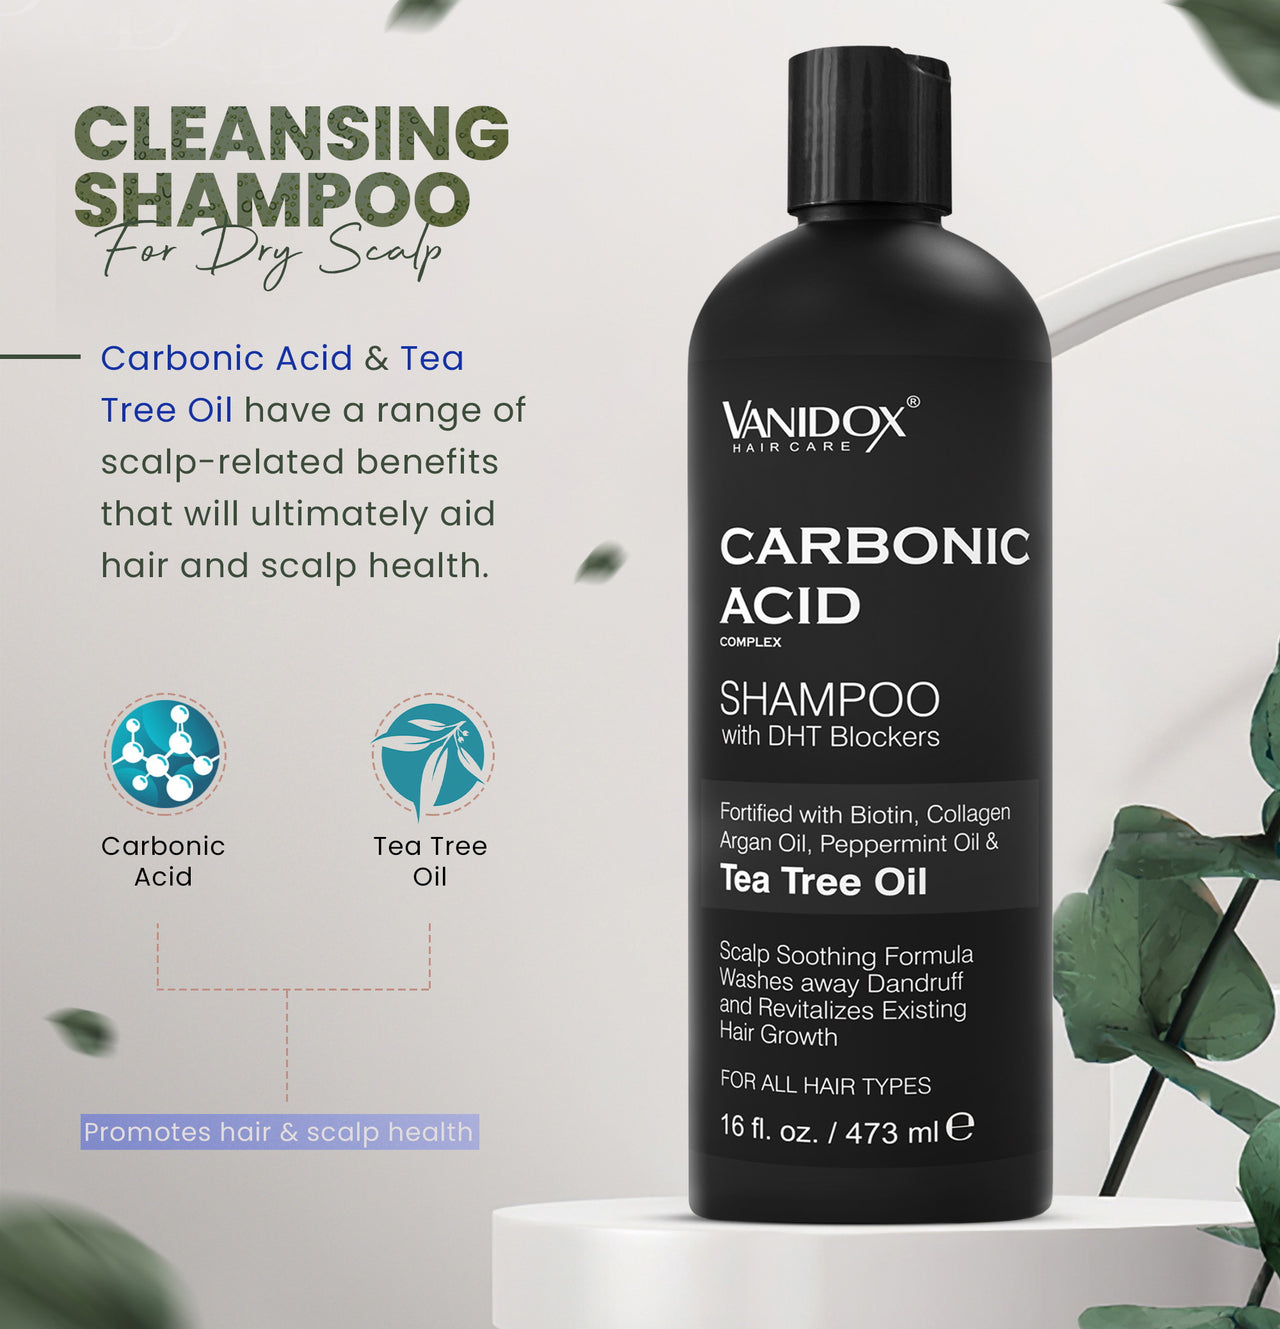 Carbonic Acid Shampoo and Conditioner | Revitalizes Hair Growth | Scalp Soothing Formula | Washes away Dandruff